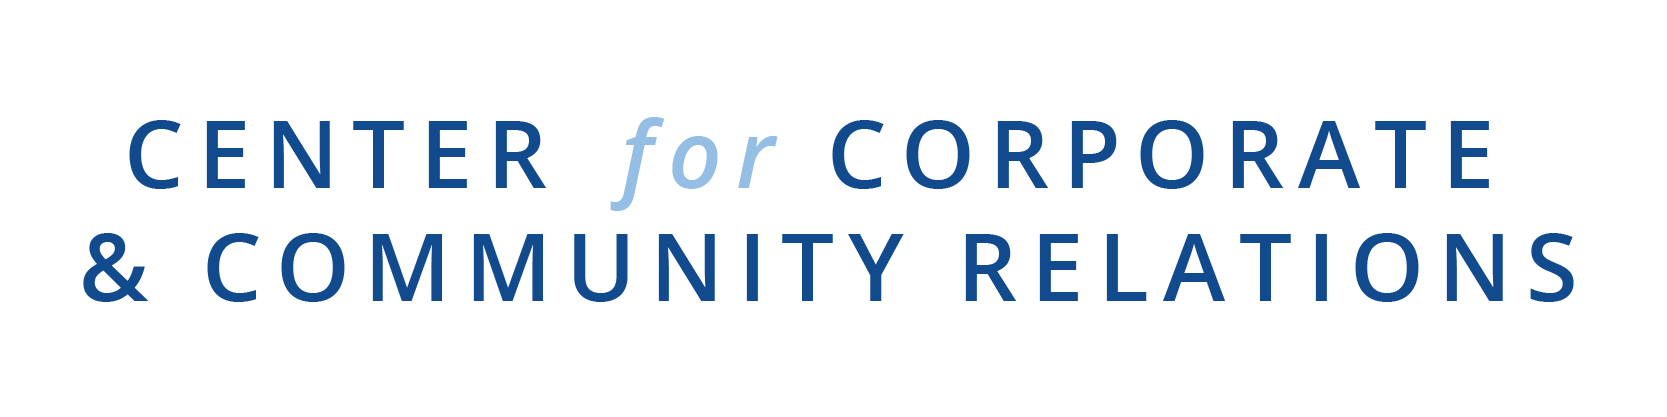 Wordmark for the Center for Corporate & Community Relations